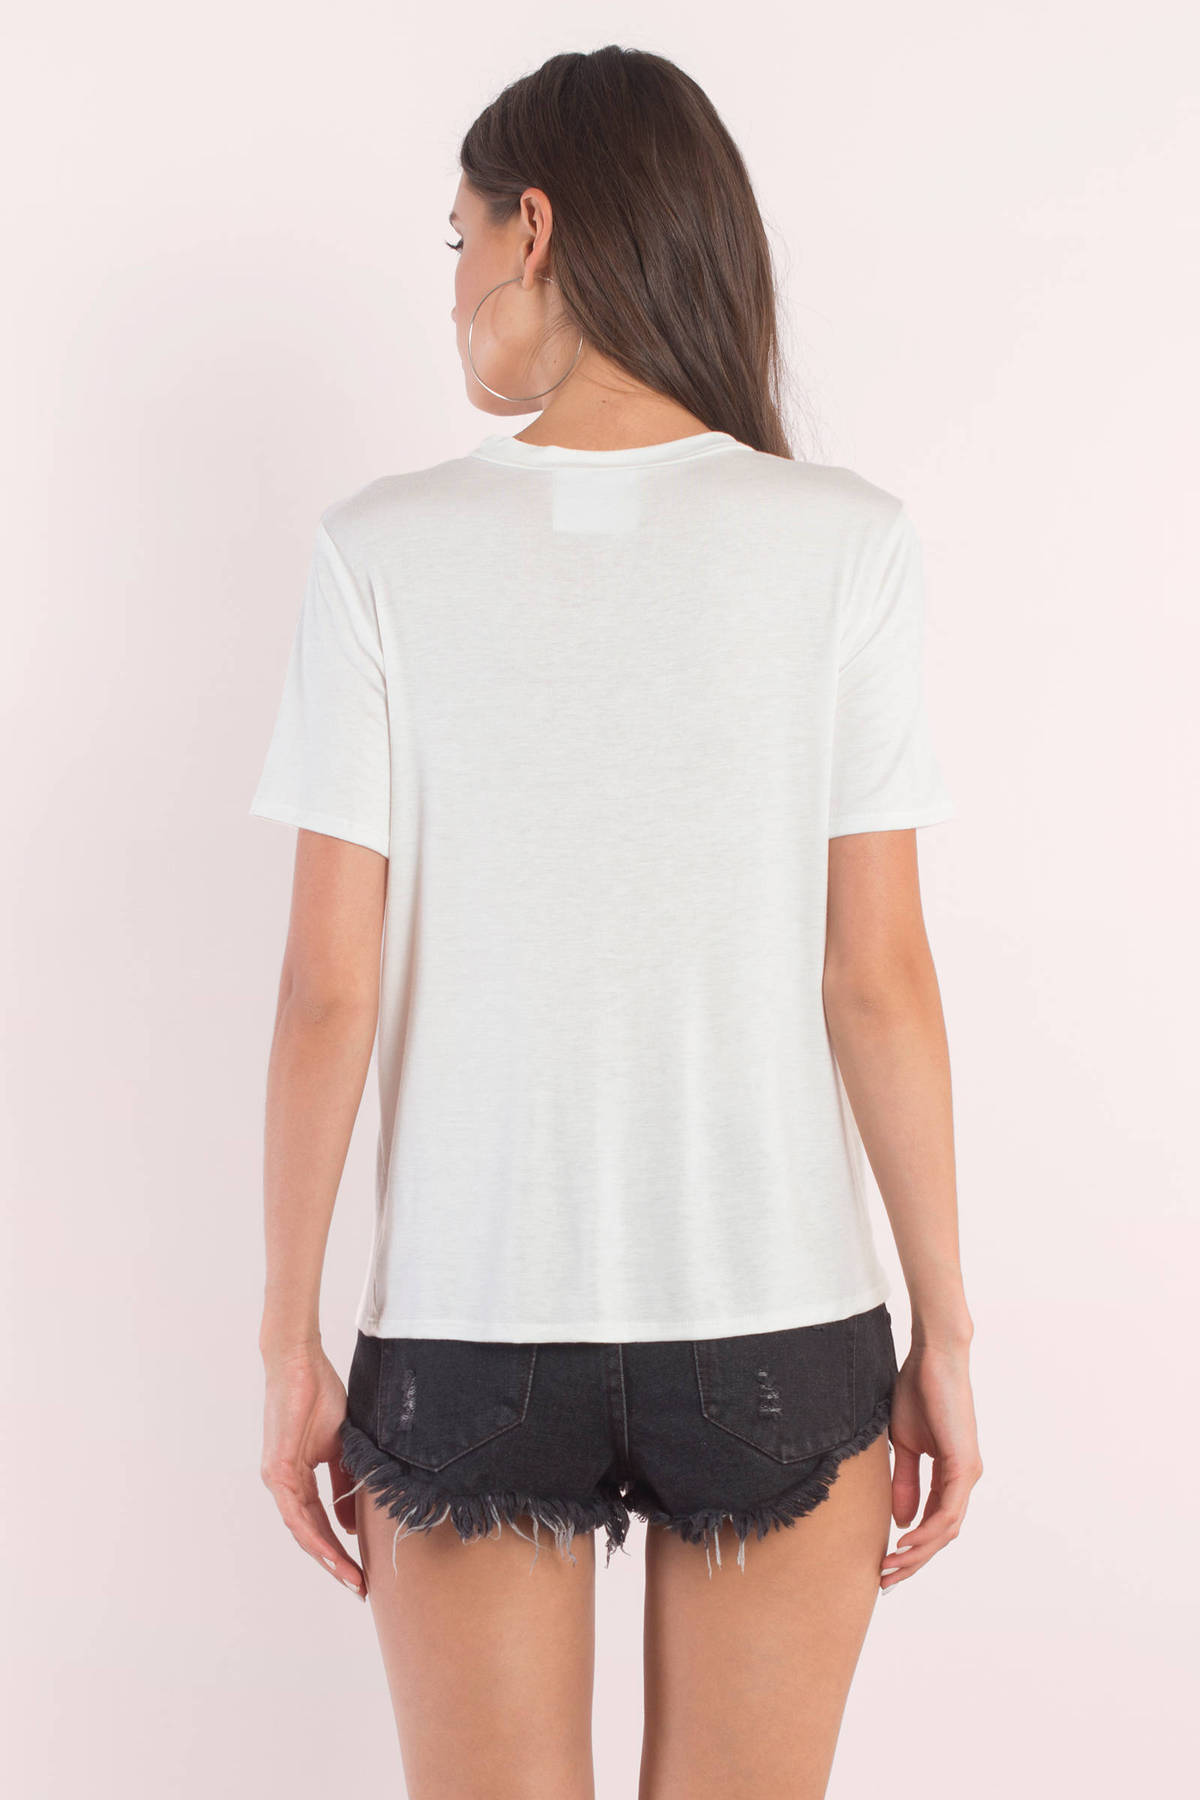 Long Live Rock Graphic Tee in Ivory - $52 | Tobi US